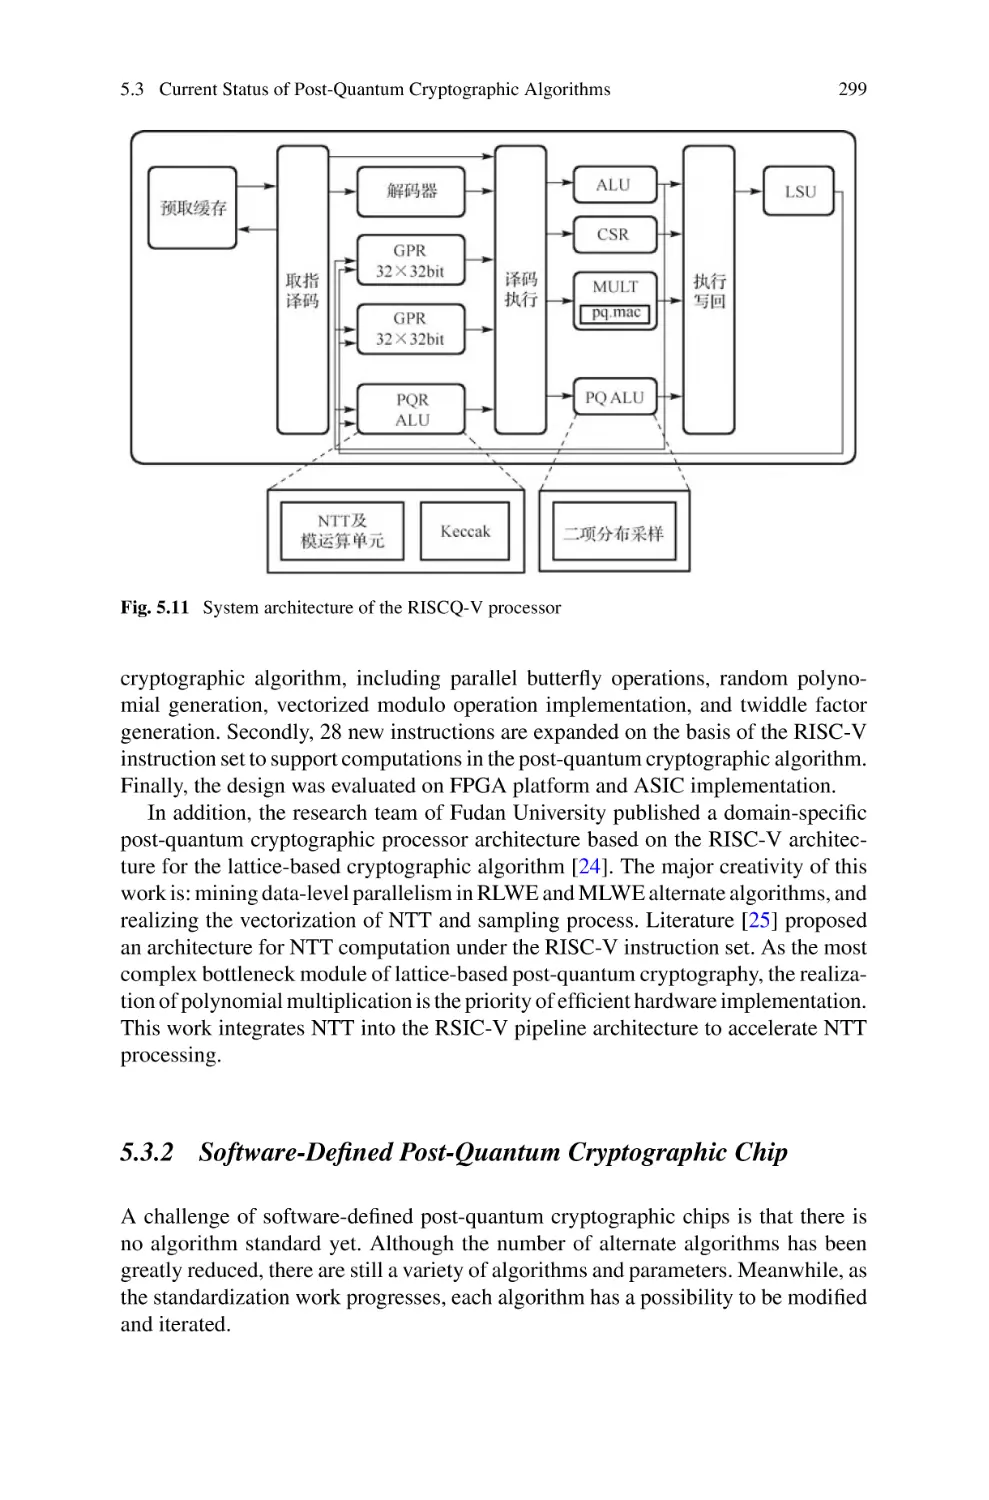 5.3.2 Software-Defined Post-Quantum Cryptographic Chip